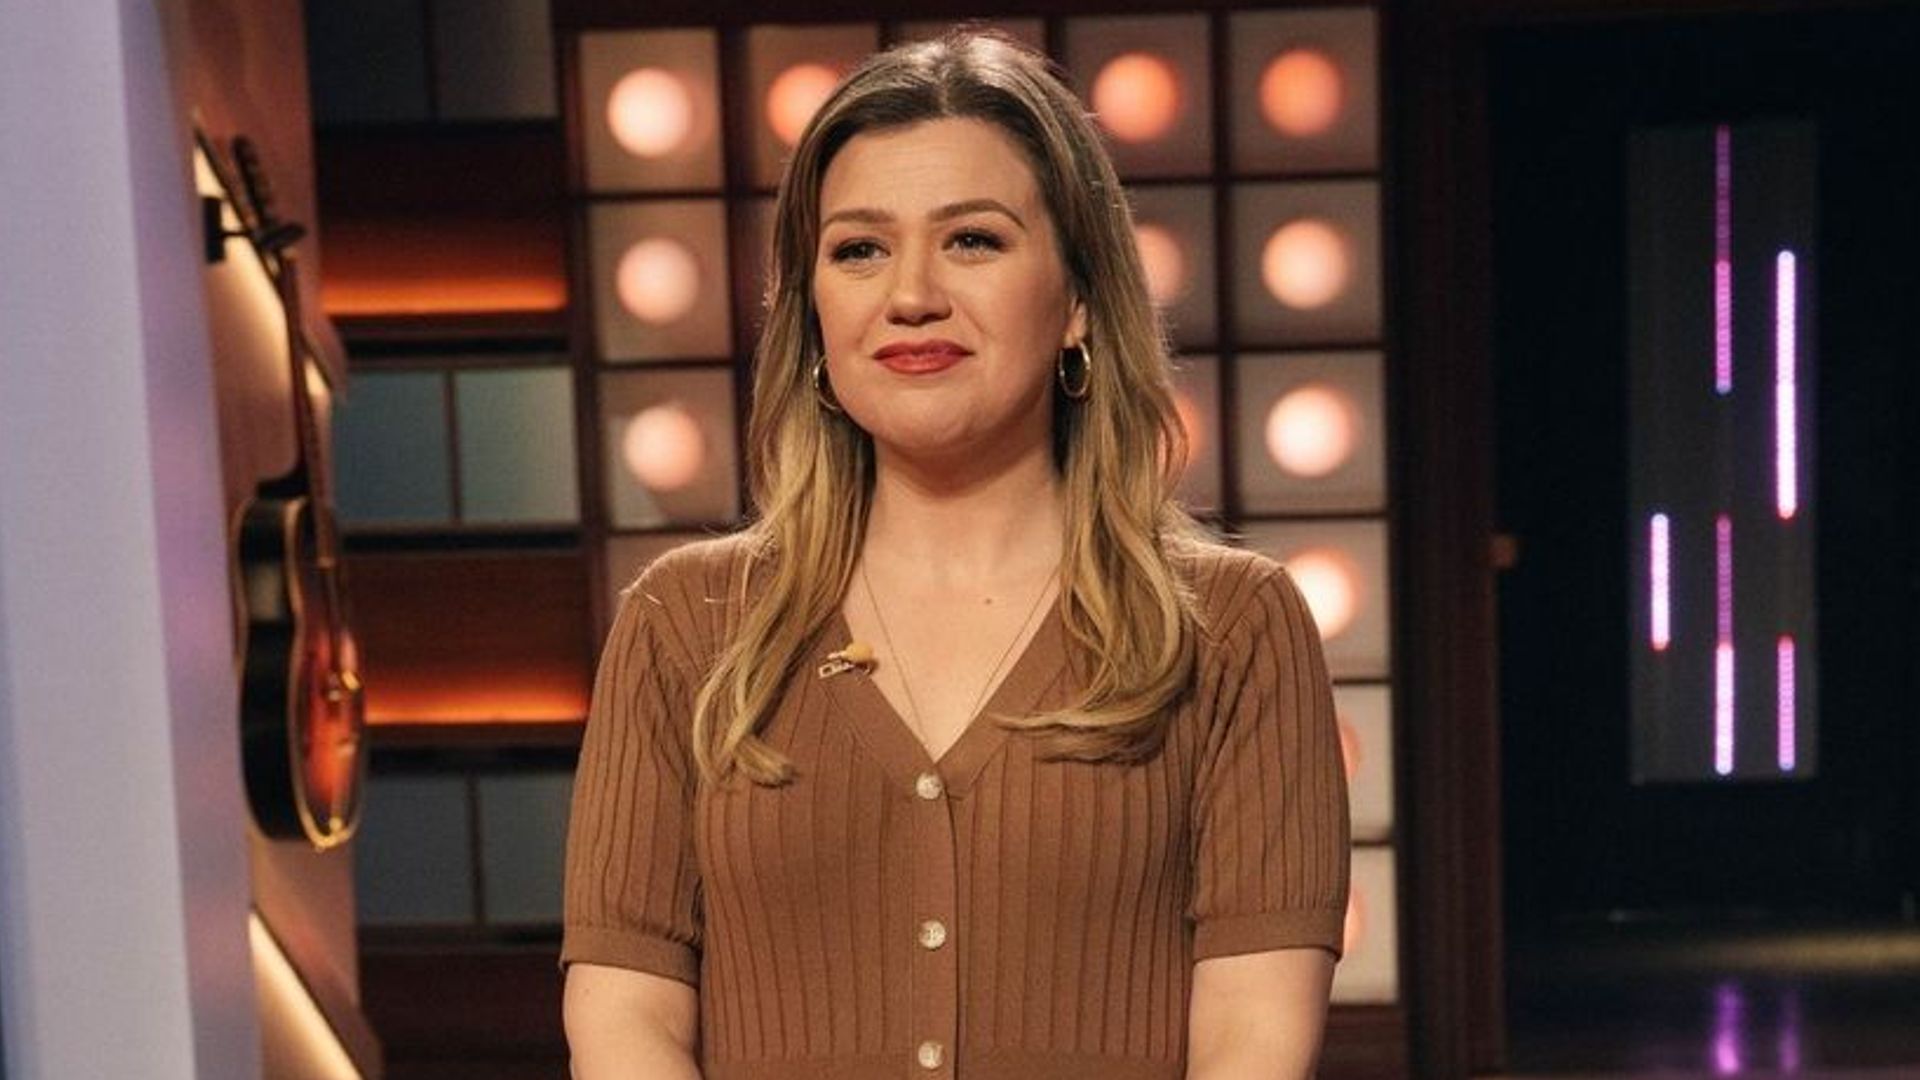 Kelly Clarkson turns 42 — she how she's transformed in just one year